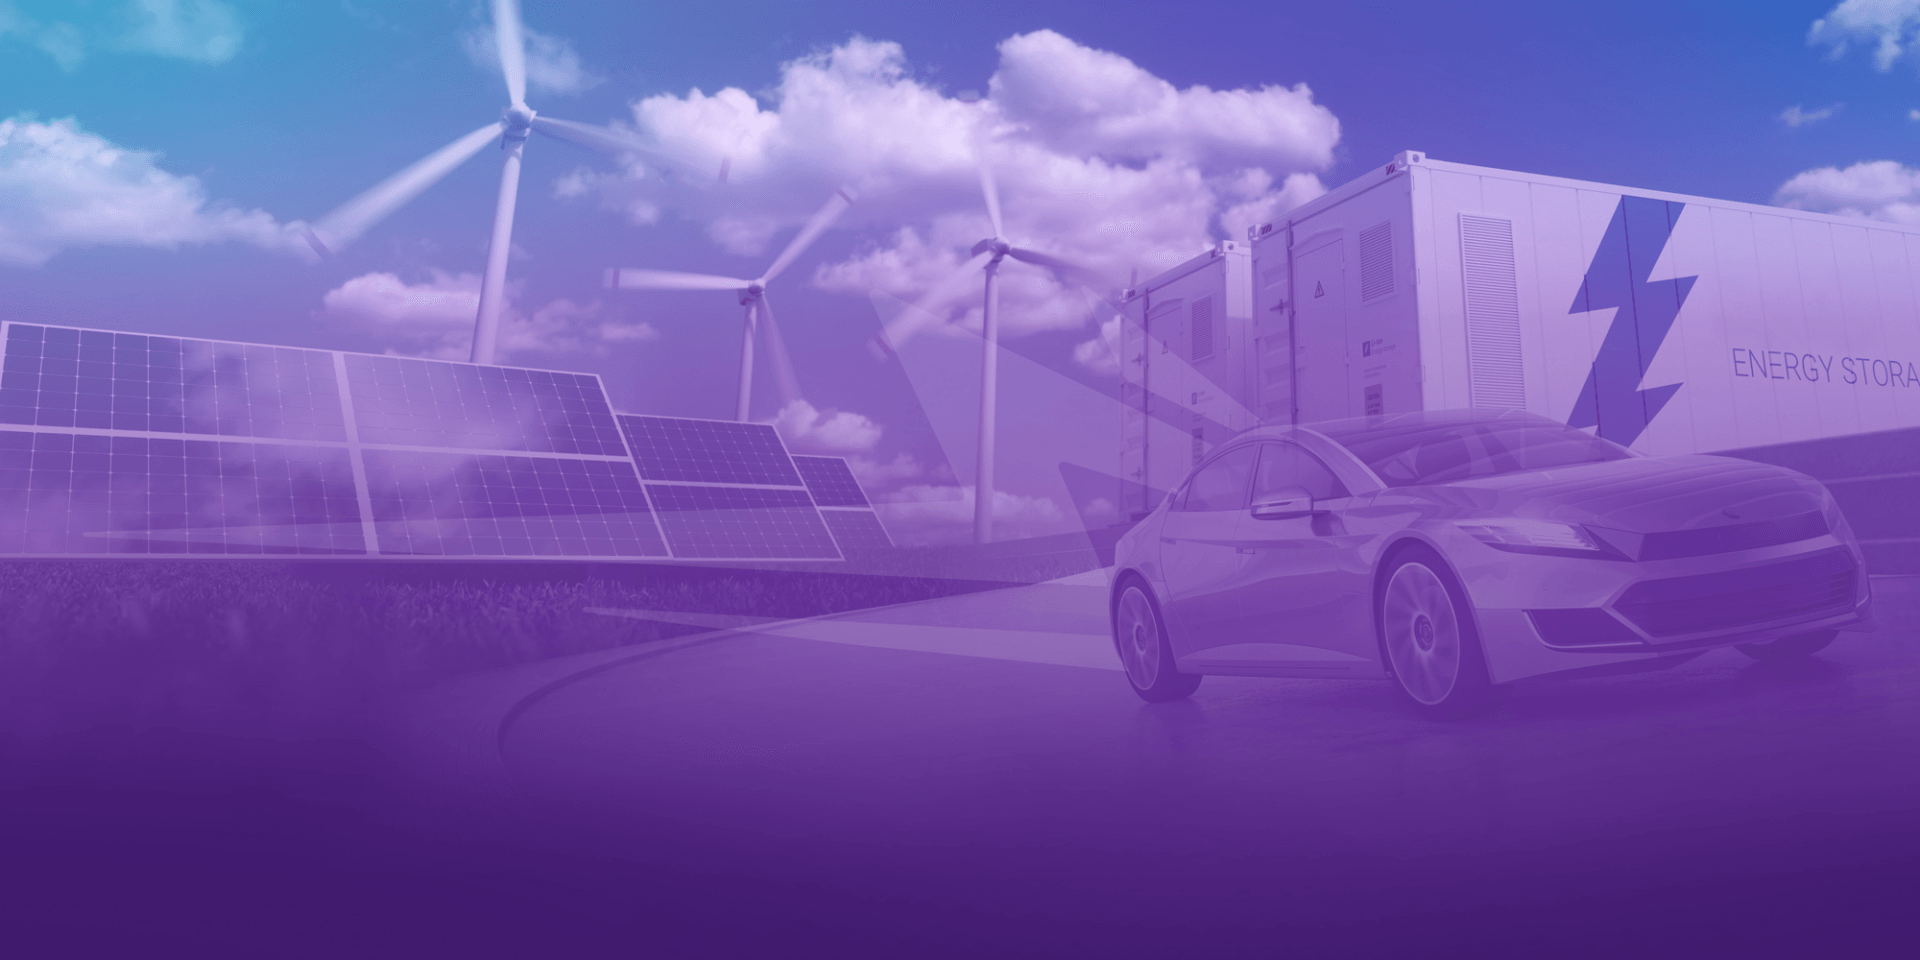 Solar panels, electric windmills, and electric vehicles represent Wolfspeed's dedication to providing a more secure energy future.